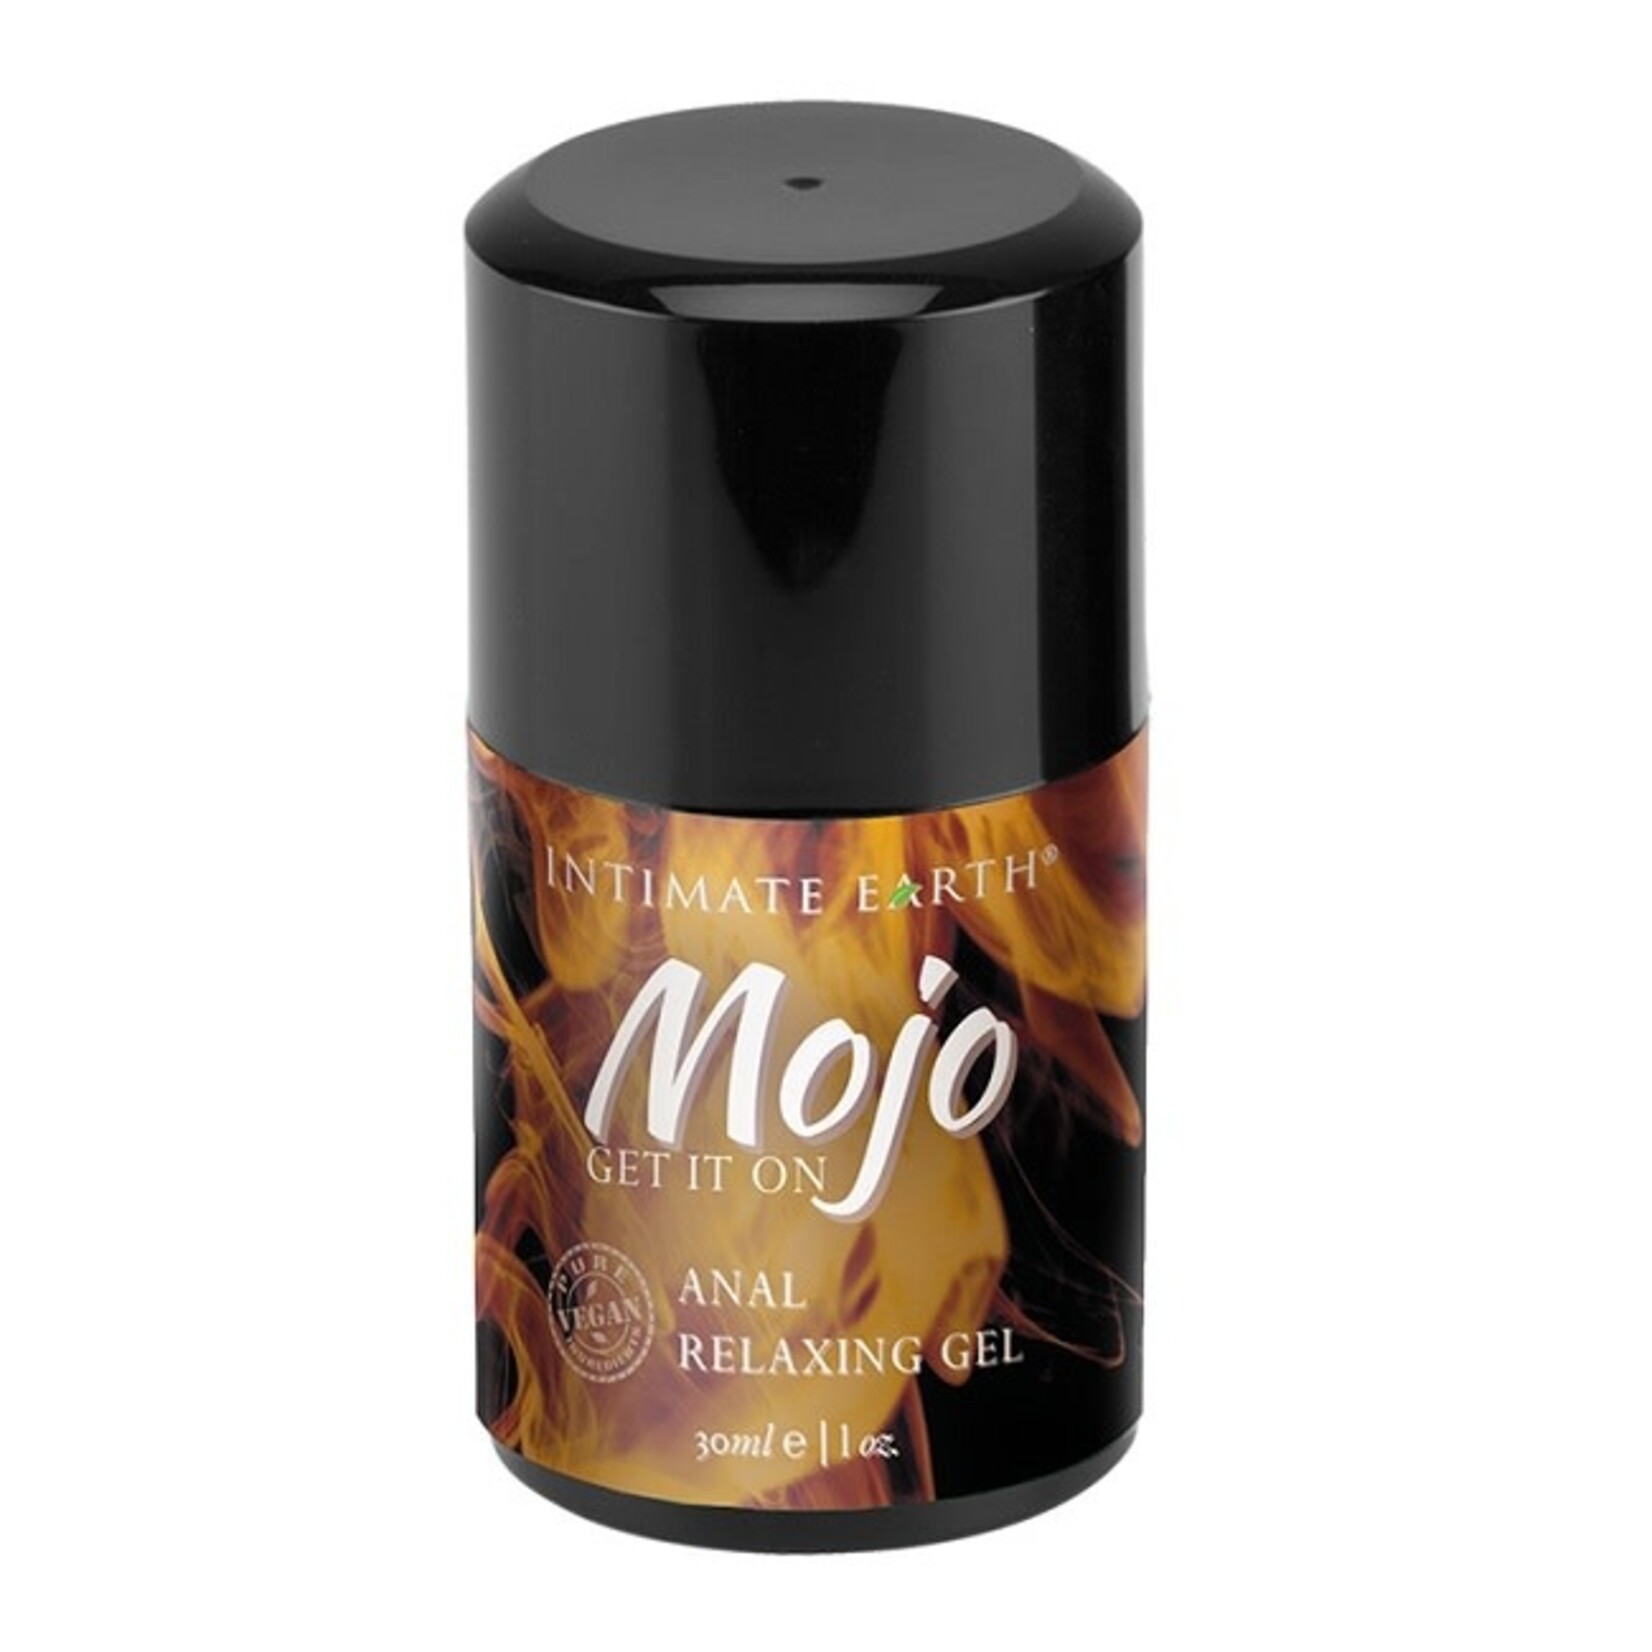 Intimate Earth Intimate Earth Mojo Anal Relaxing Gel 1oz